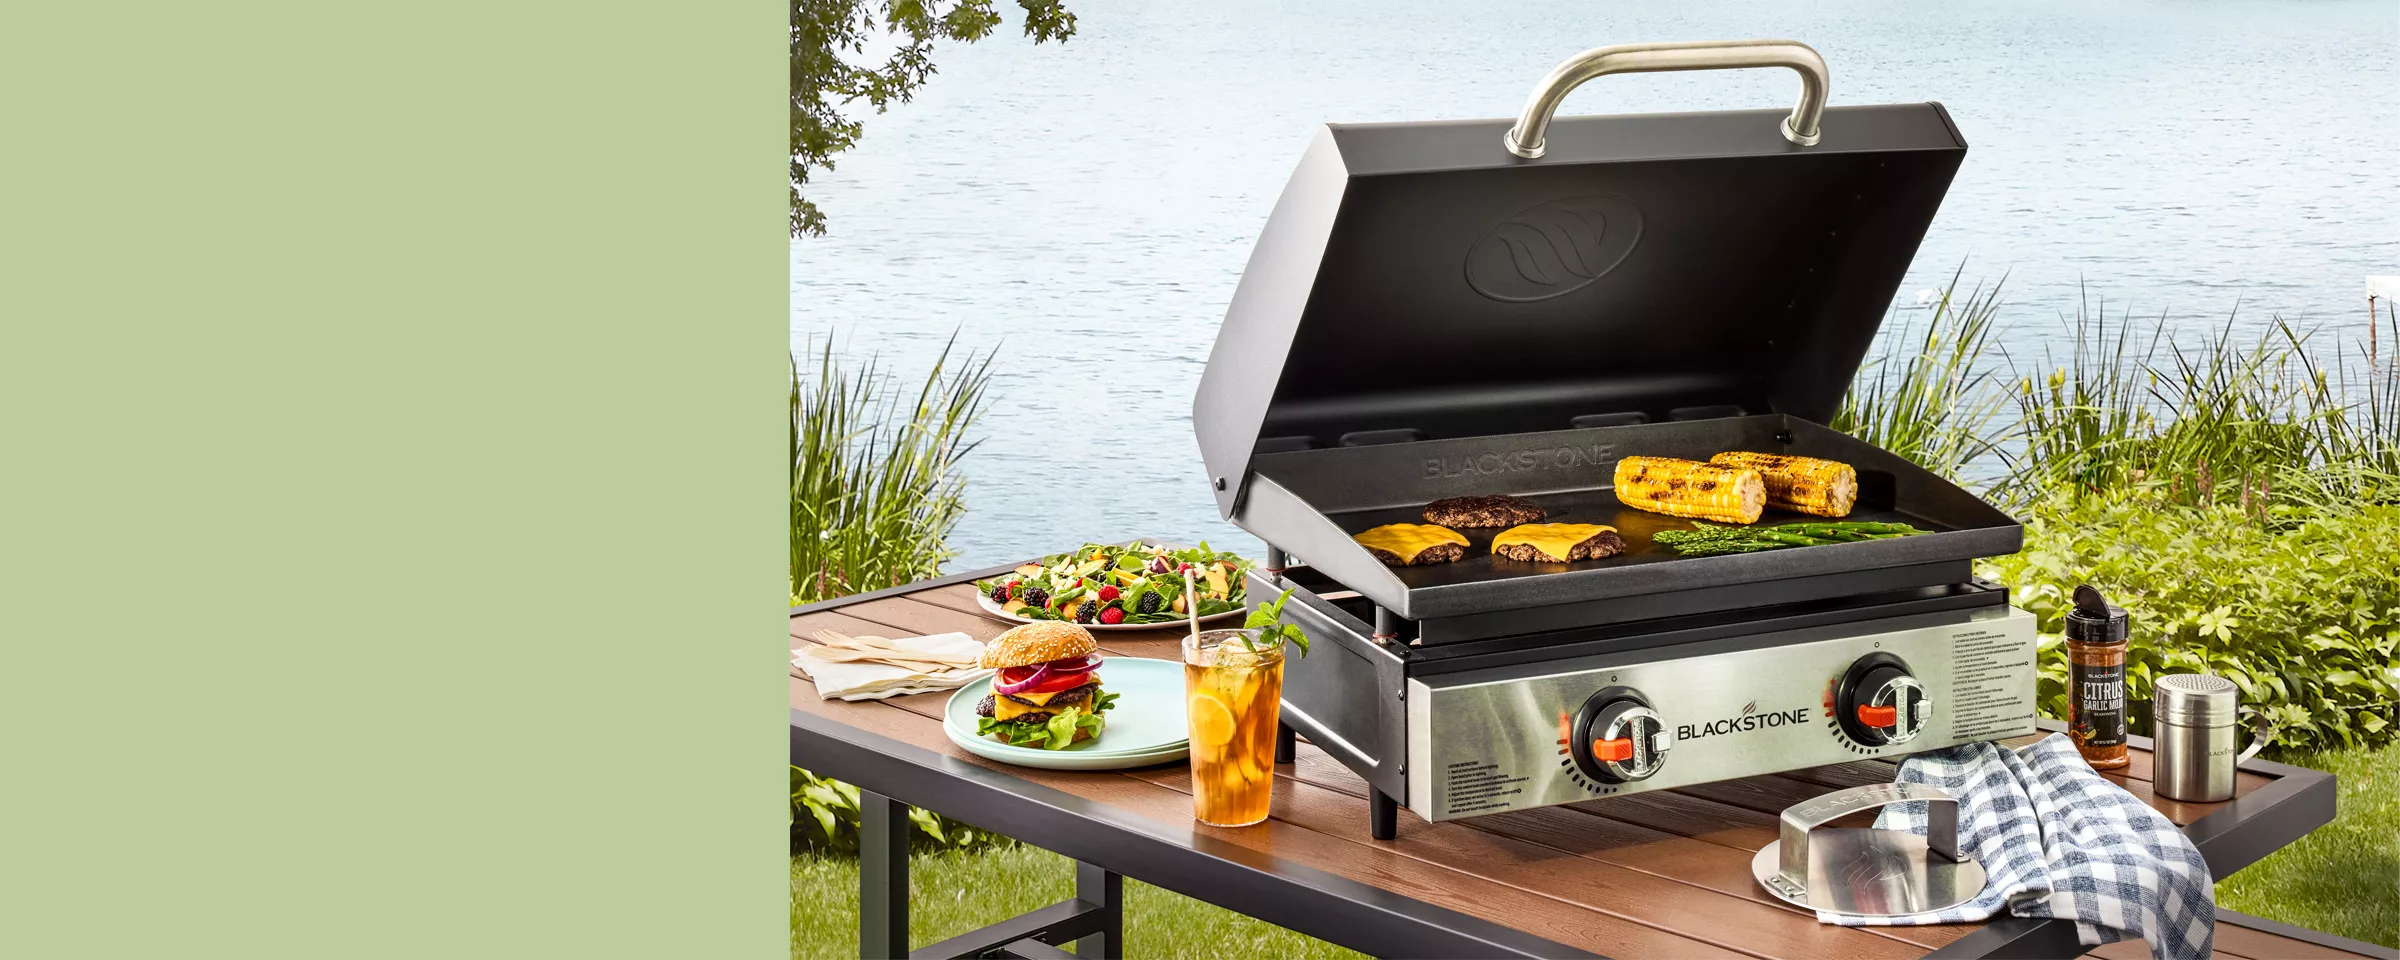 Outside near a serene pond, a portable Blackstone grill is on a patio table—filled with typical grilled meats & veggies. Grilling accessories & spices sit on the table, along with a refreshing iced tea, a berry-filled salad & assembled cheeseburger.